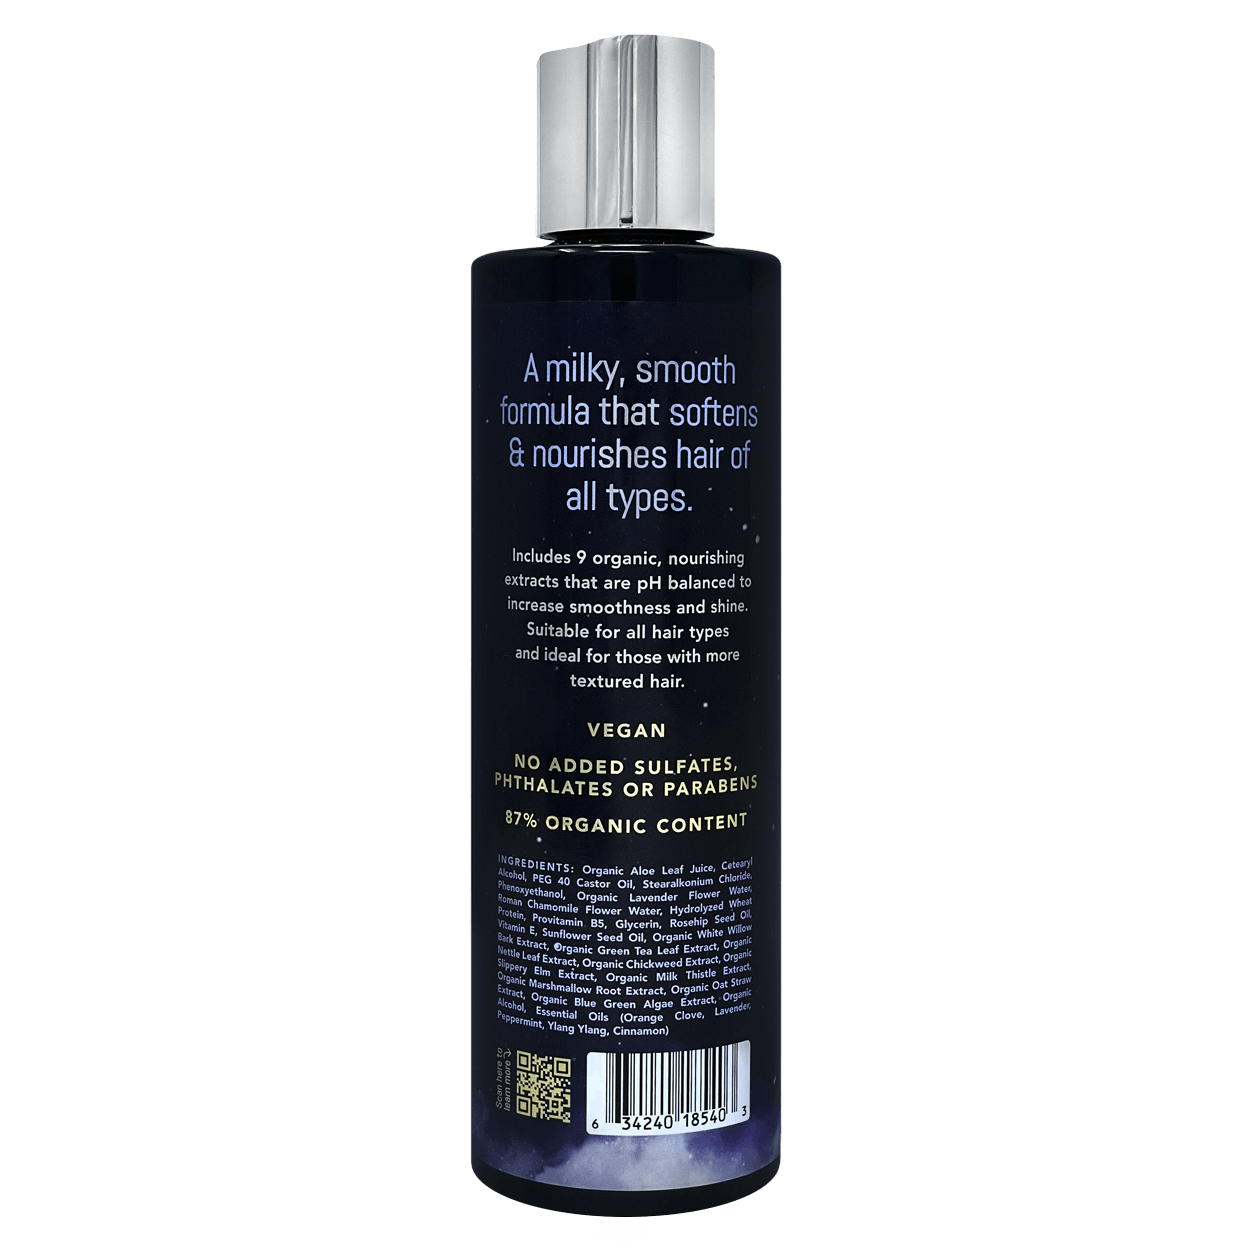 Head in the Clouds: Conditioner - 8oz